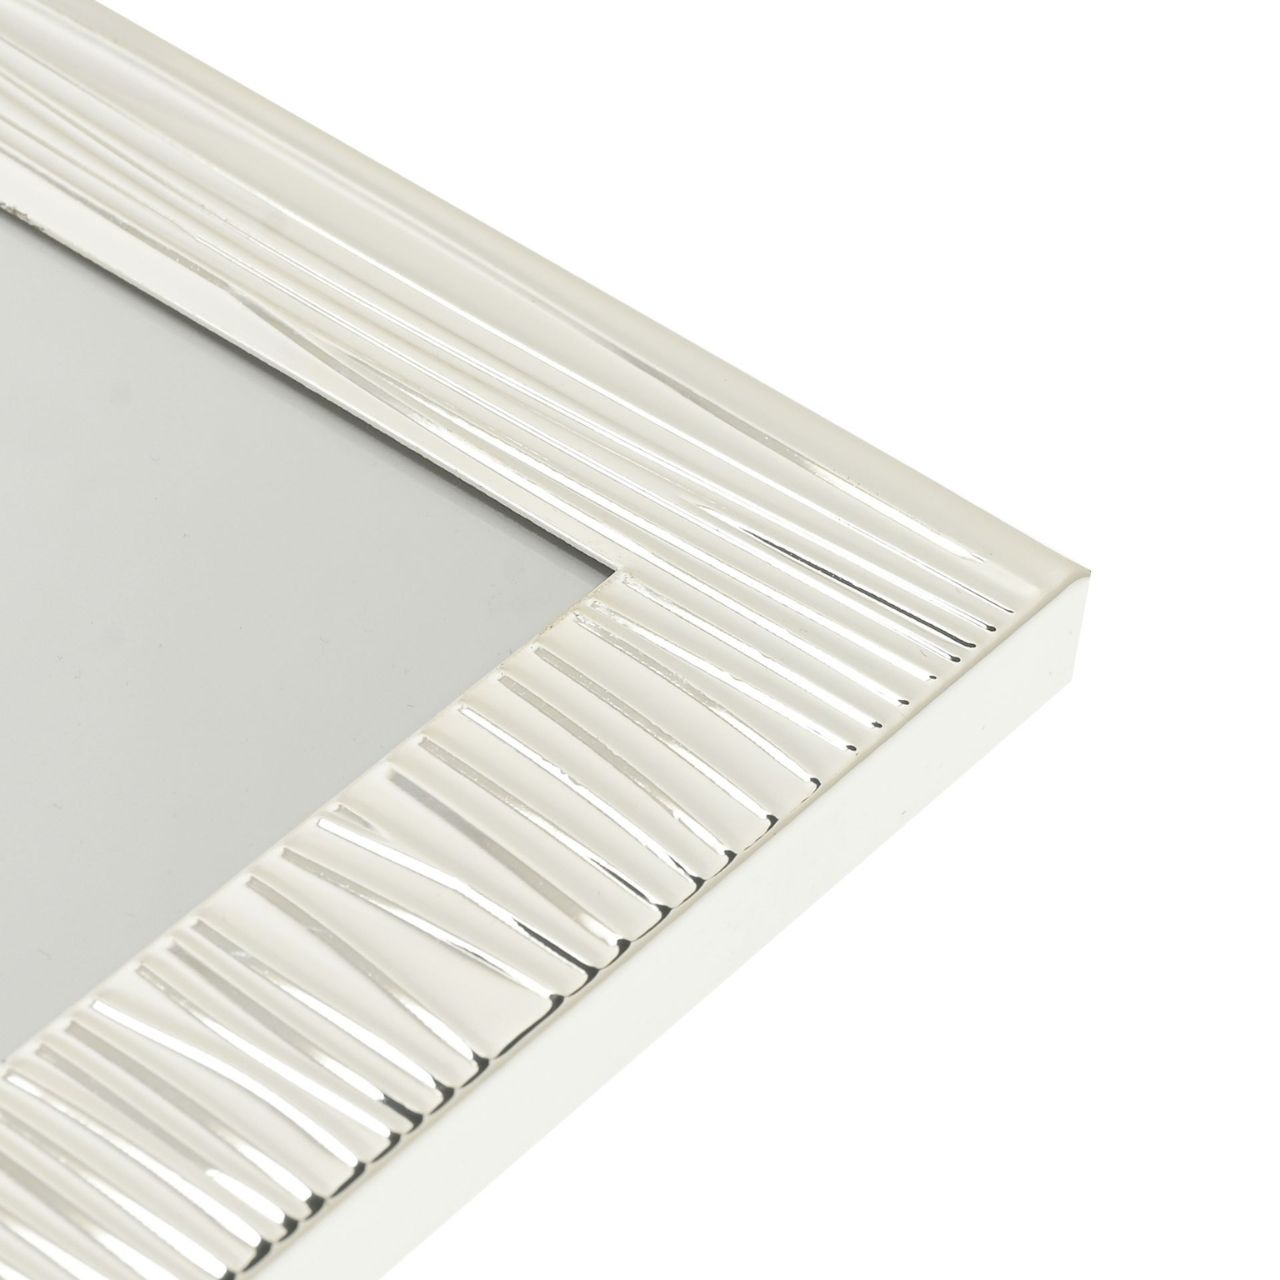 Ripple Texture Silverplated Frame 4" x 6"  Adding personality to your home by utilising texture, this silver-plated frame creates an ultra-modern feel.